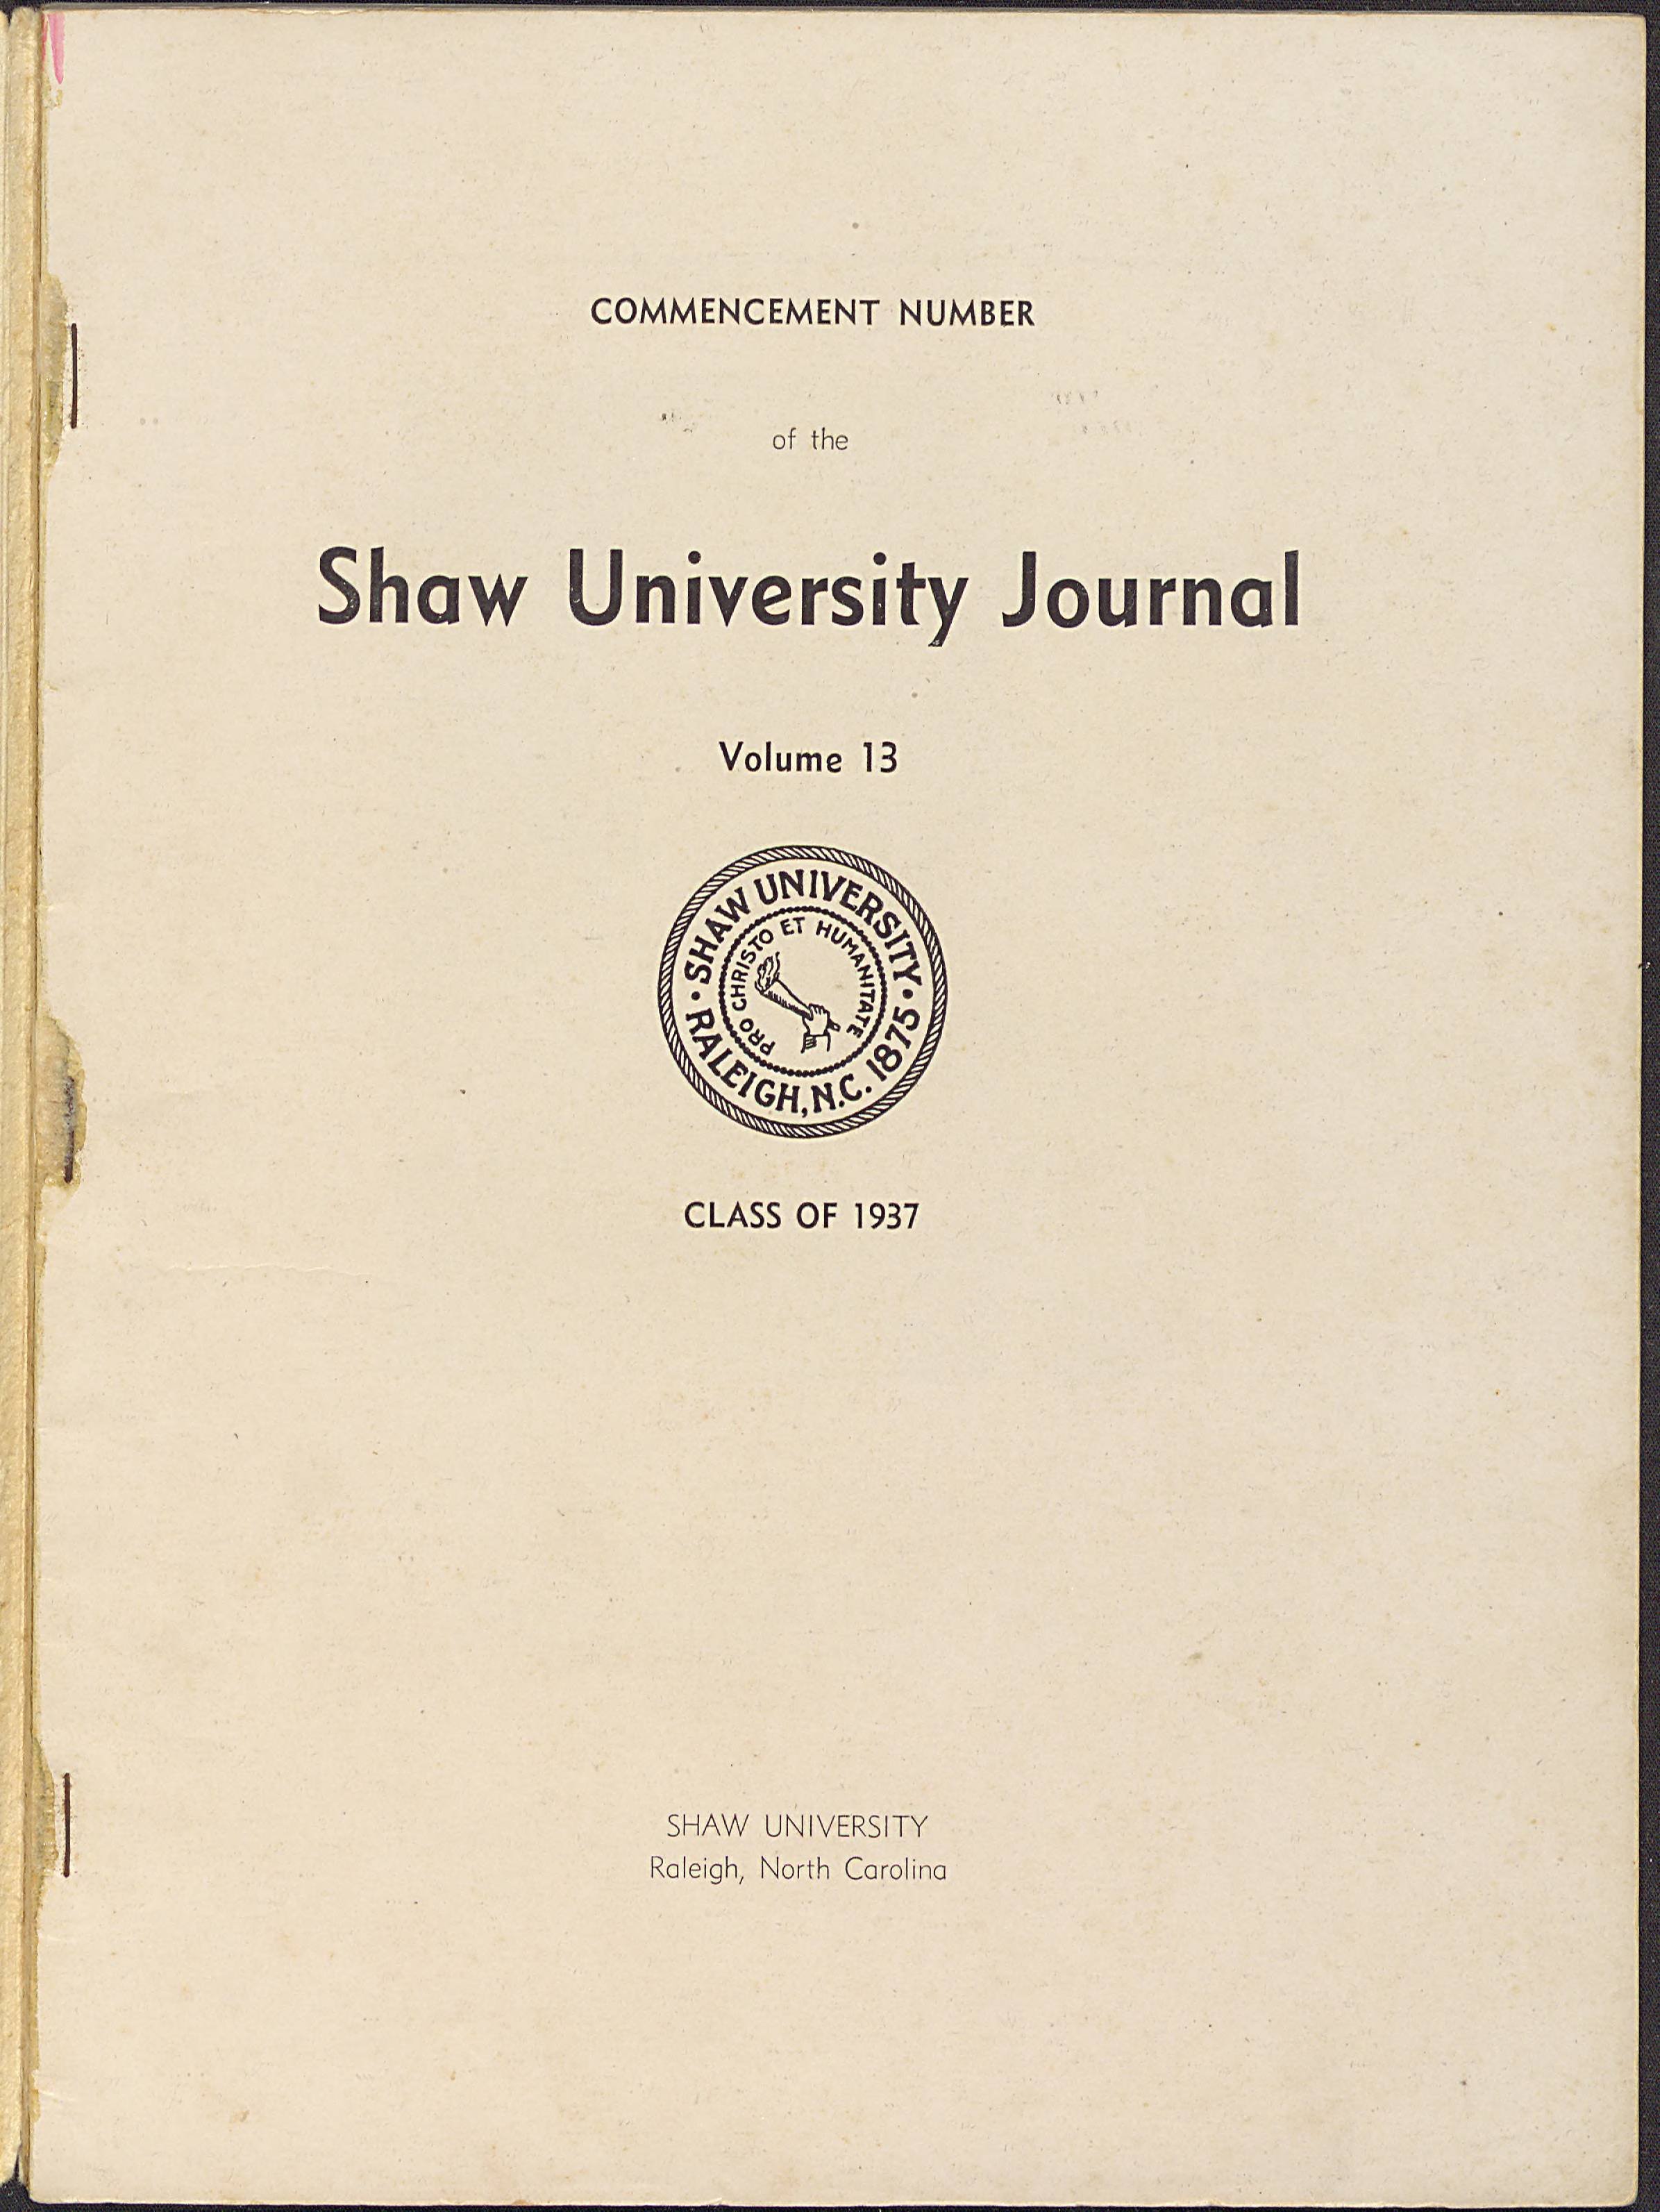 The Shaw University Journal: Commencement Number [1937]